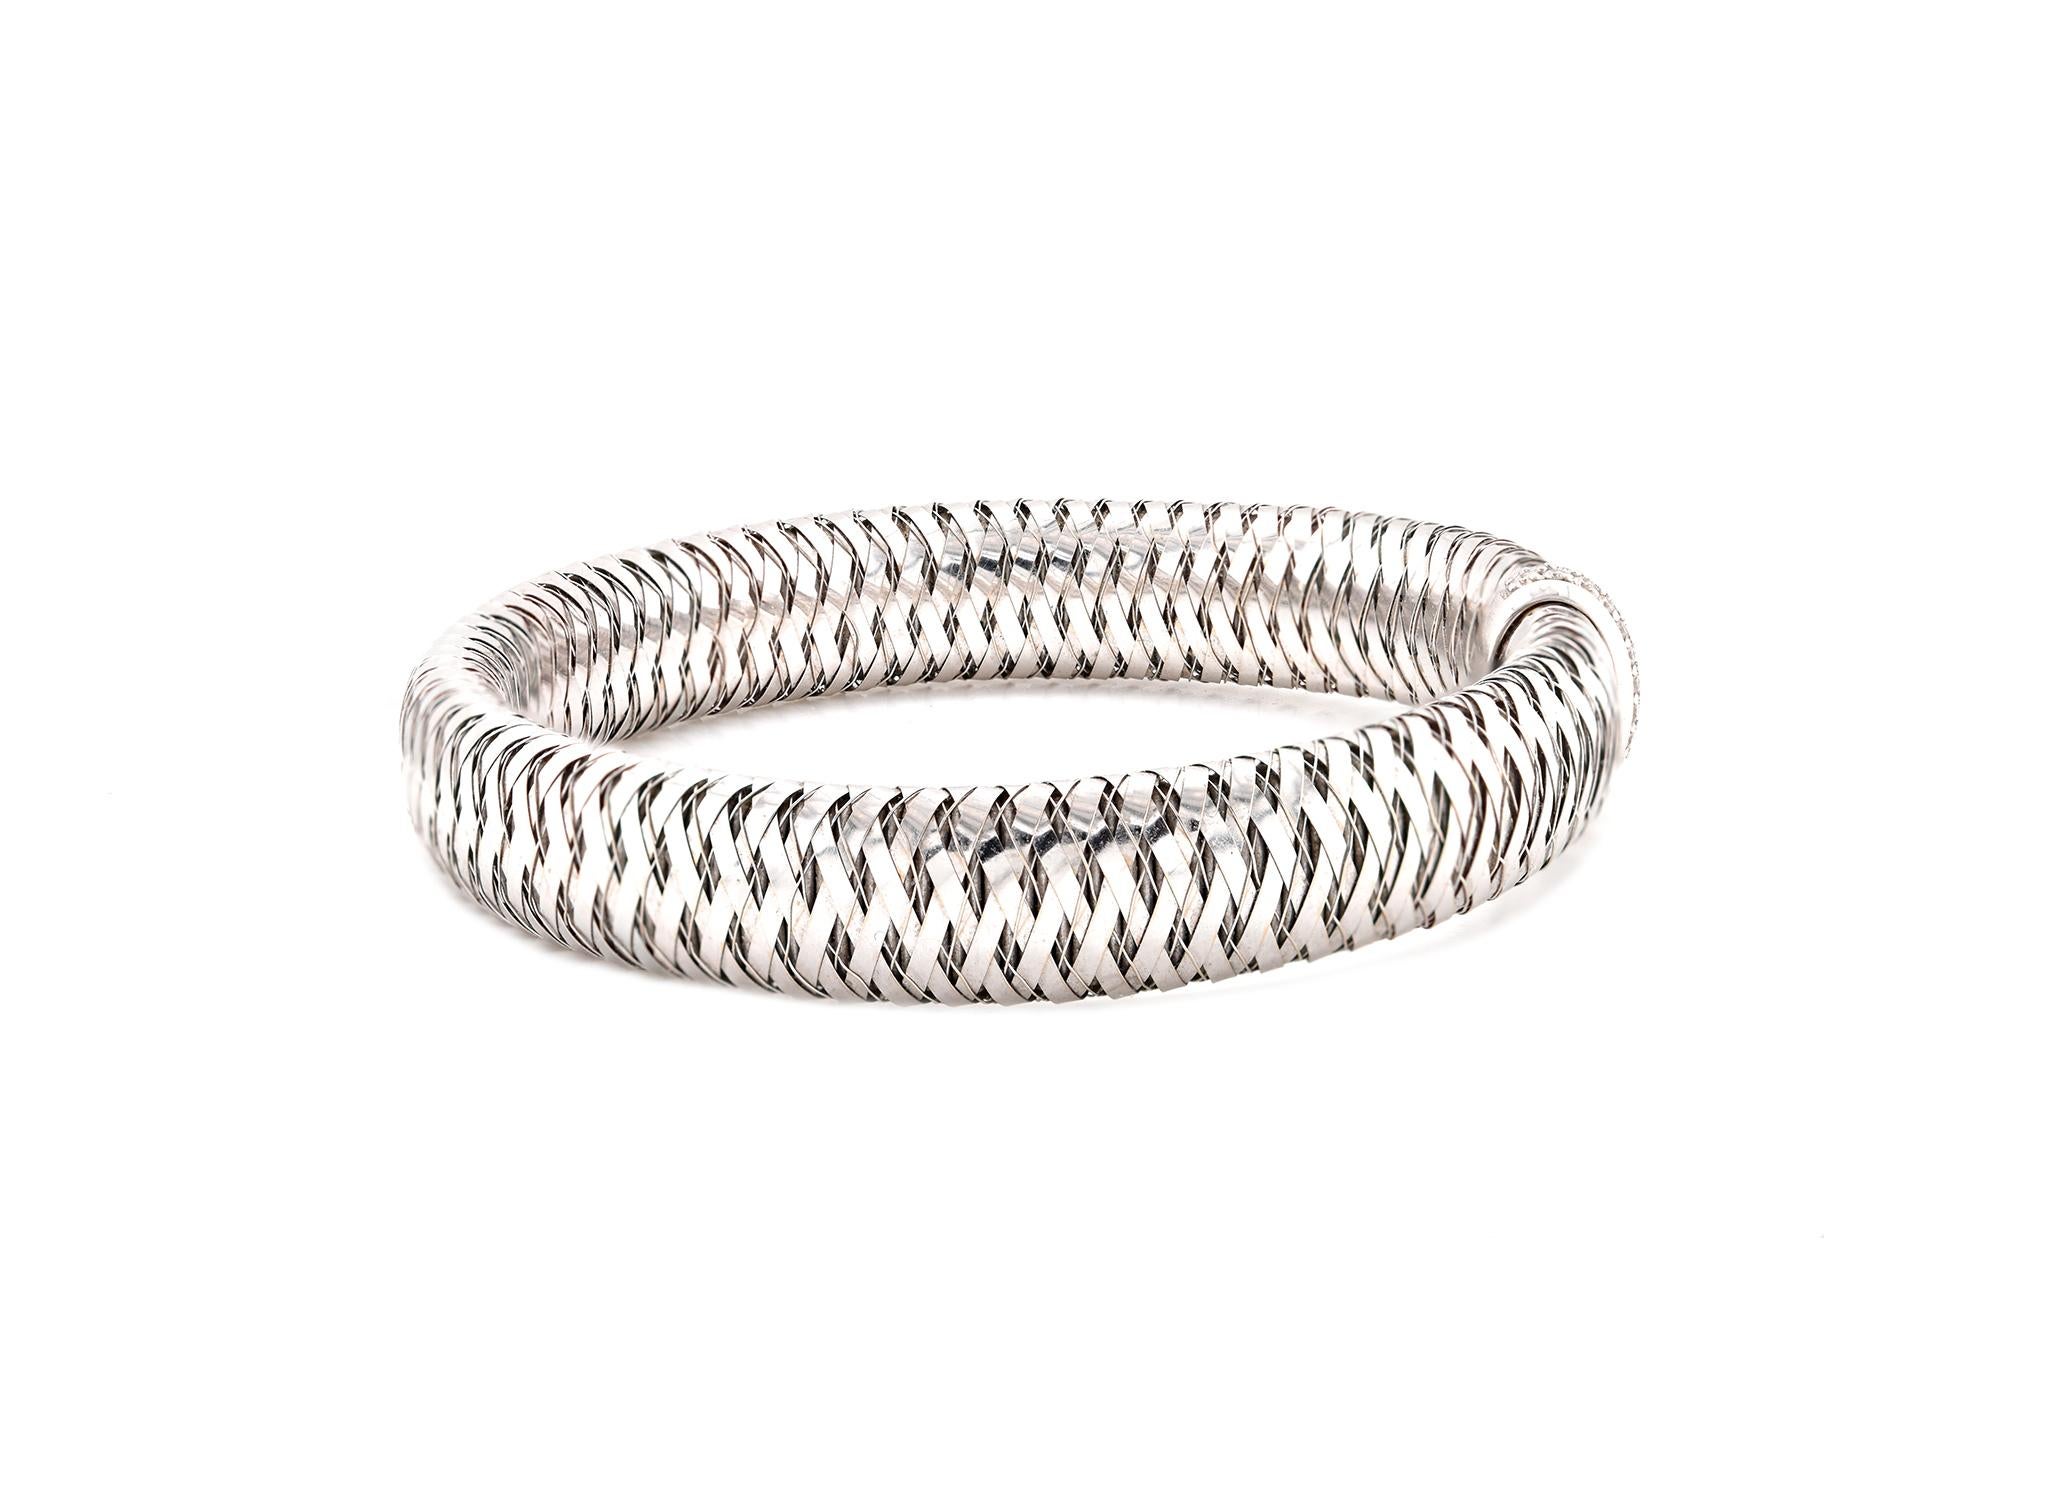 Designer: Roberto Coin 
Material: 18k white gold
Diamonds: 26 round brilliant cuts = .25cttw
Color: G
Clarity: VS1
Dimensions: bracelet will fit up to a 7-inch wrist
Weight: 27.76 grams
